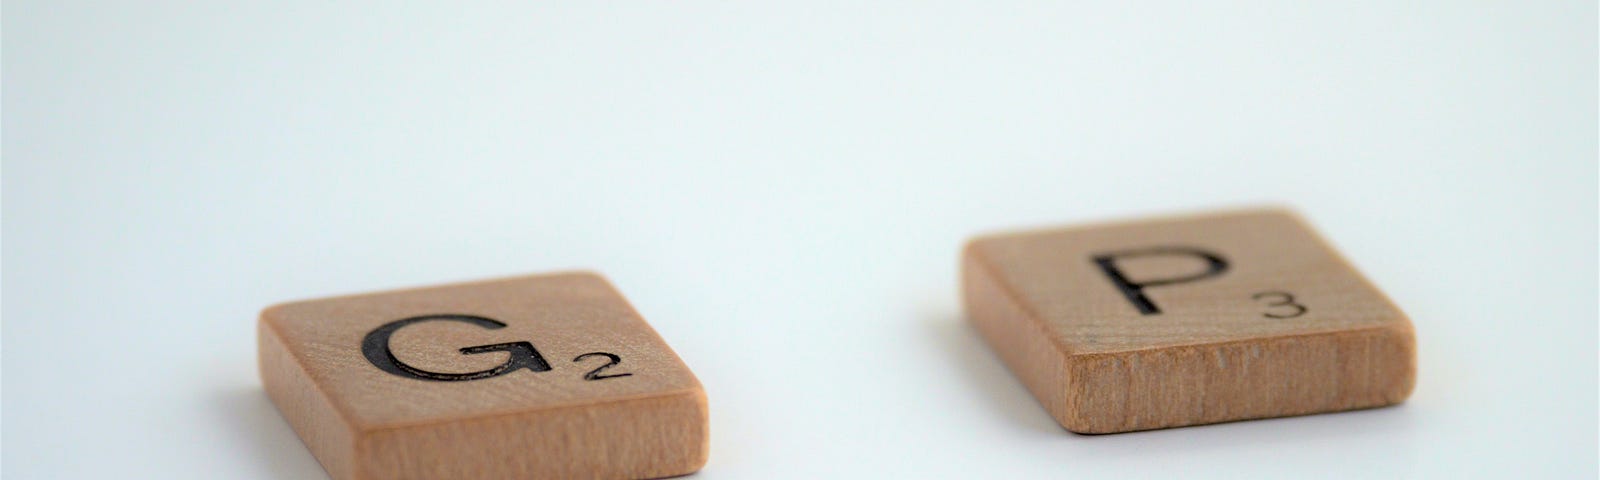 Two scrabble pieces, G and P, are placed a space apart to represent “market gap”